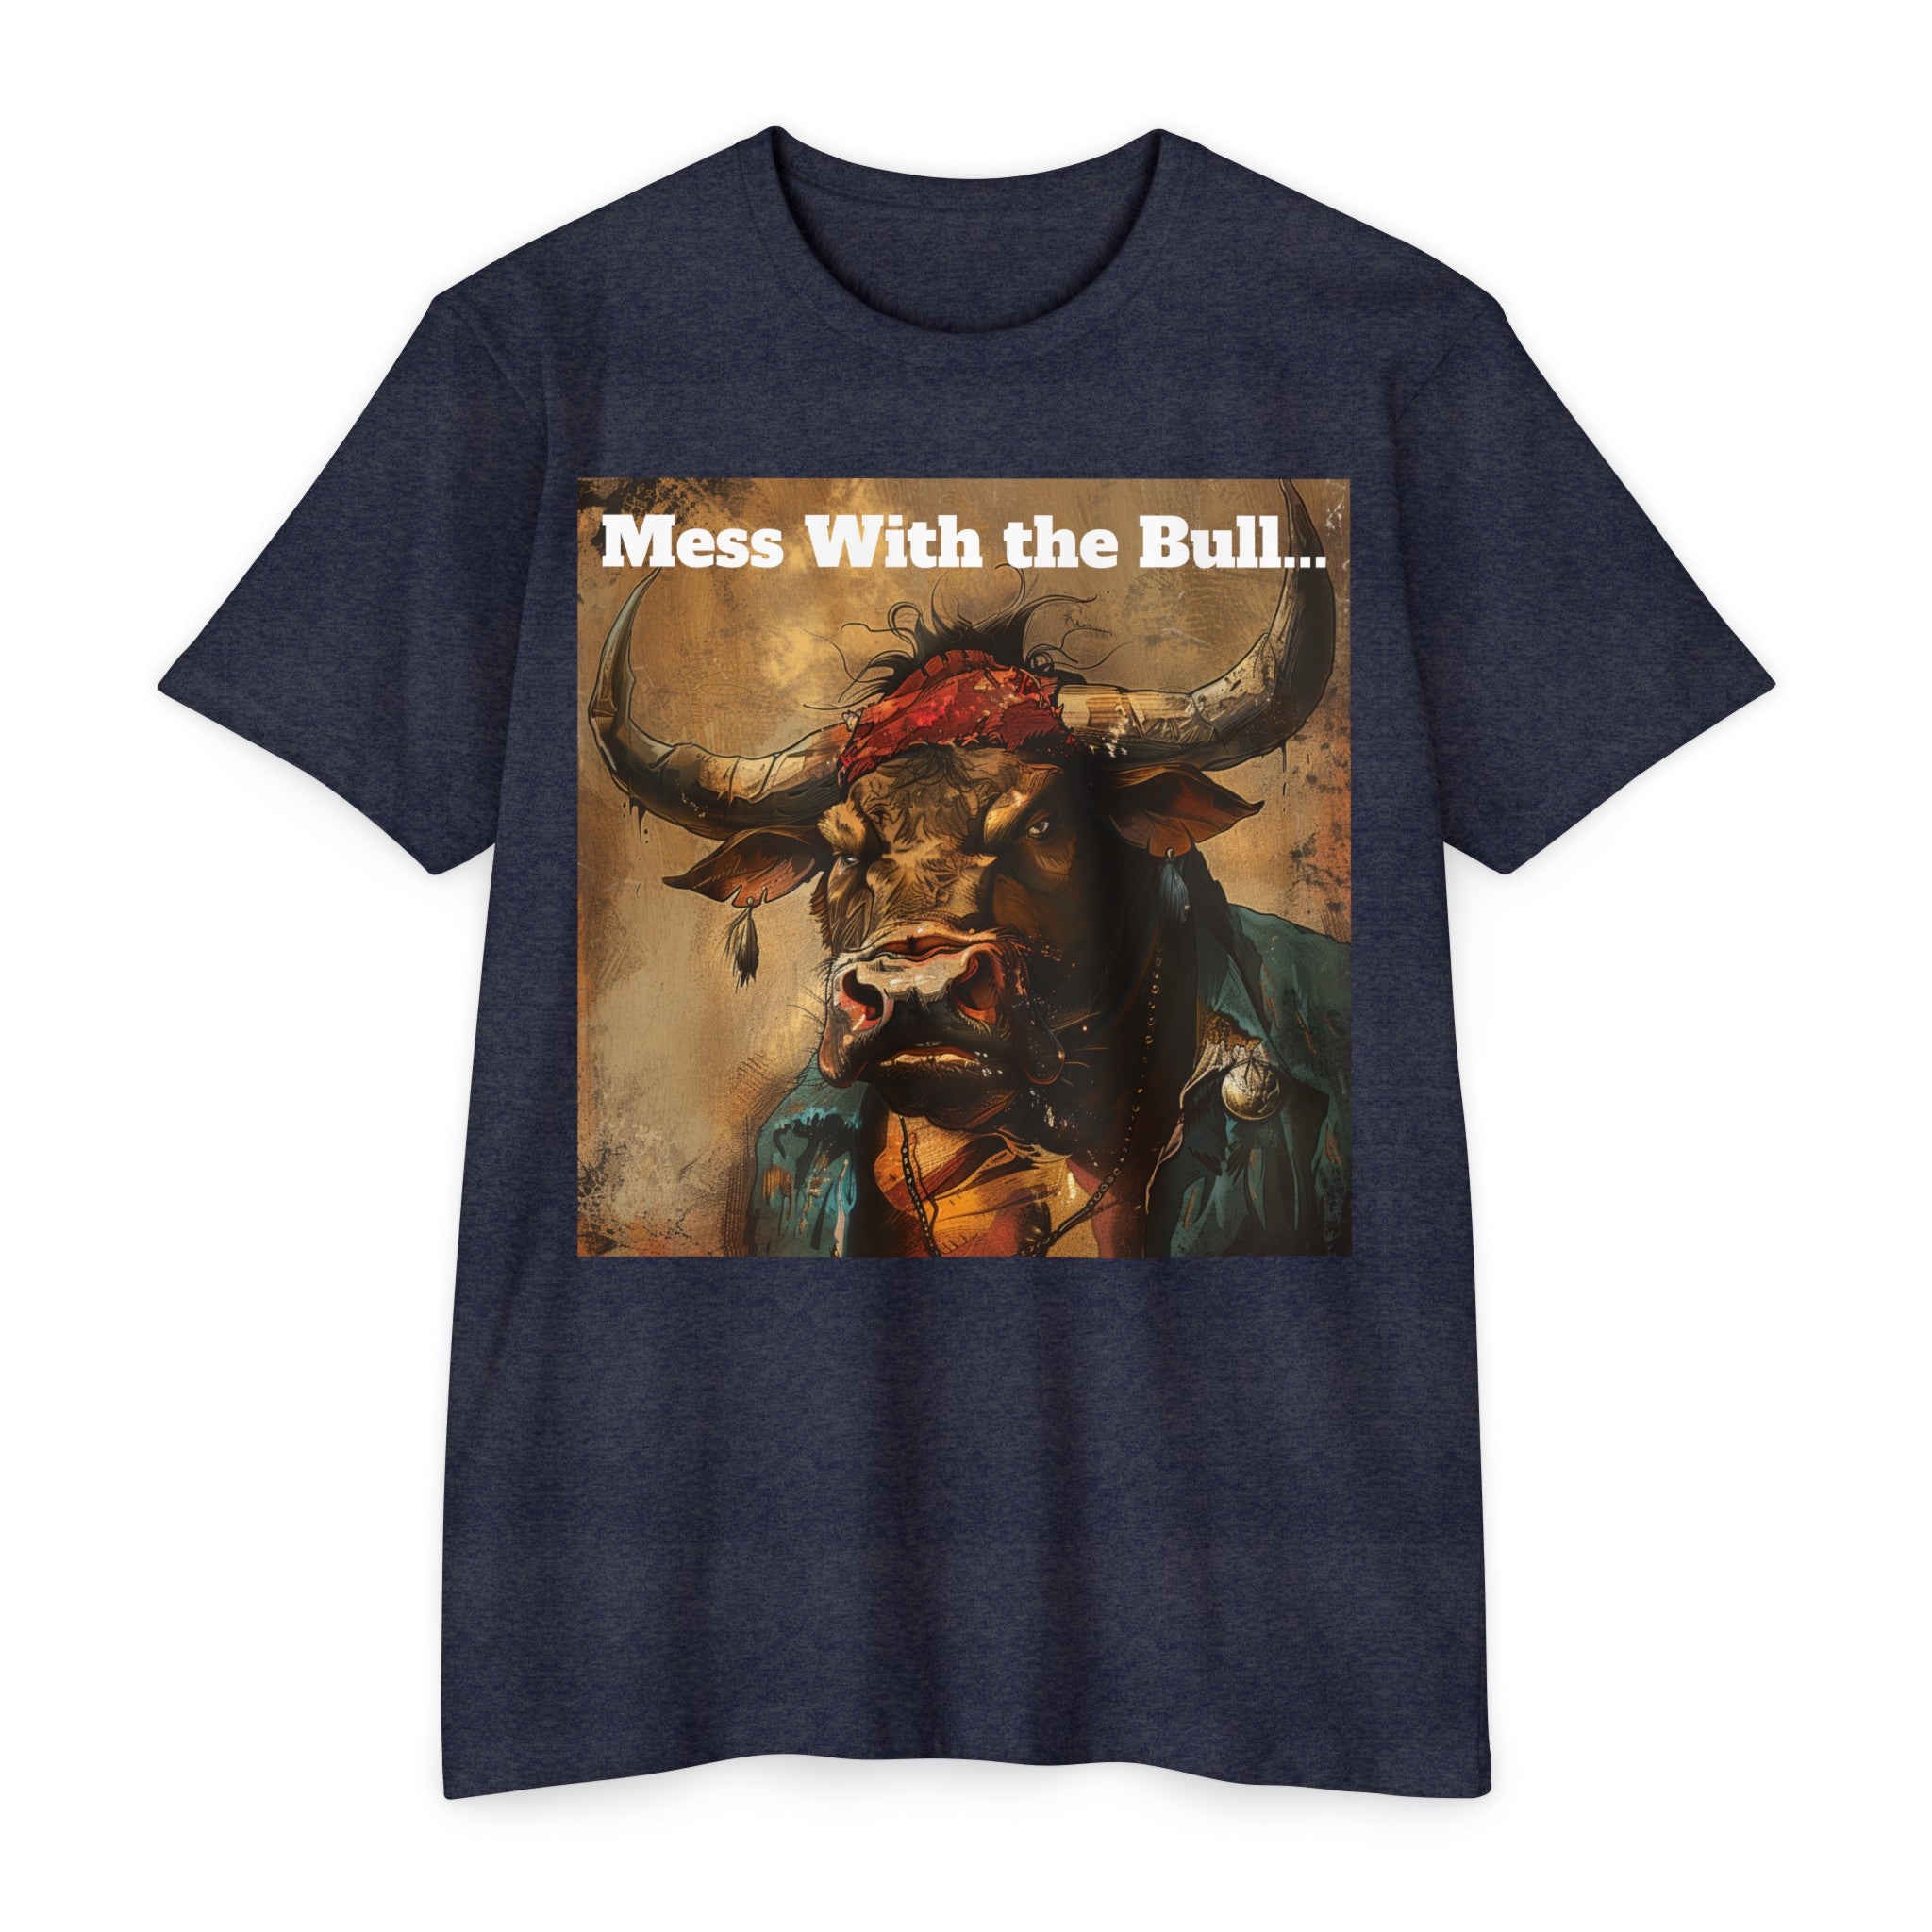 The image features a robust and detailed bull illustration on a unisex CVC jersey t-shirt, showcasing the muscular build and intense gaze of the bull, perfectly reflecting the shirt's "Mess with the Bull" theme. The fabric's quality is evident, promising both style and durability, while the design appeals to those who appreciate a blend of artistry and attitude in their fashion choices.